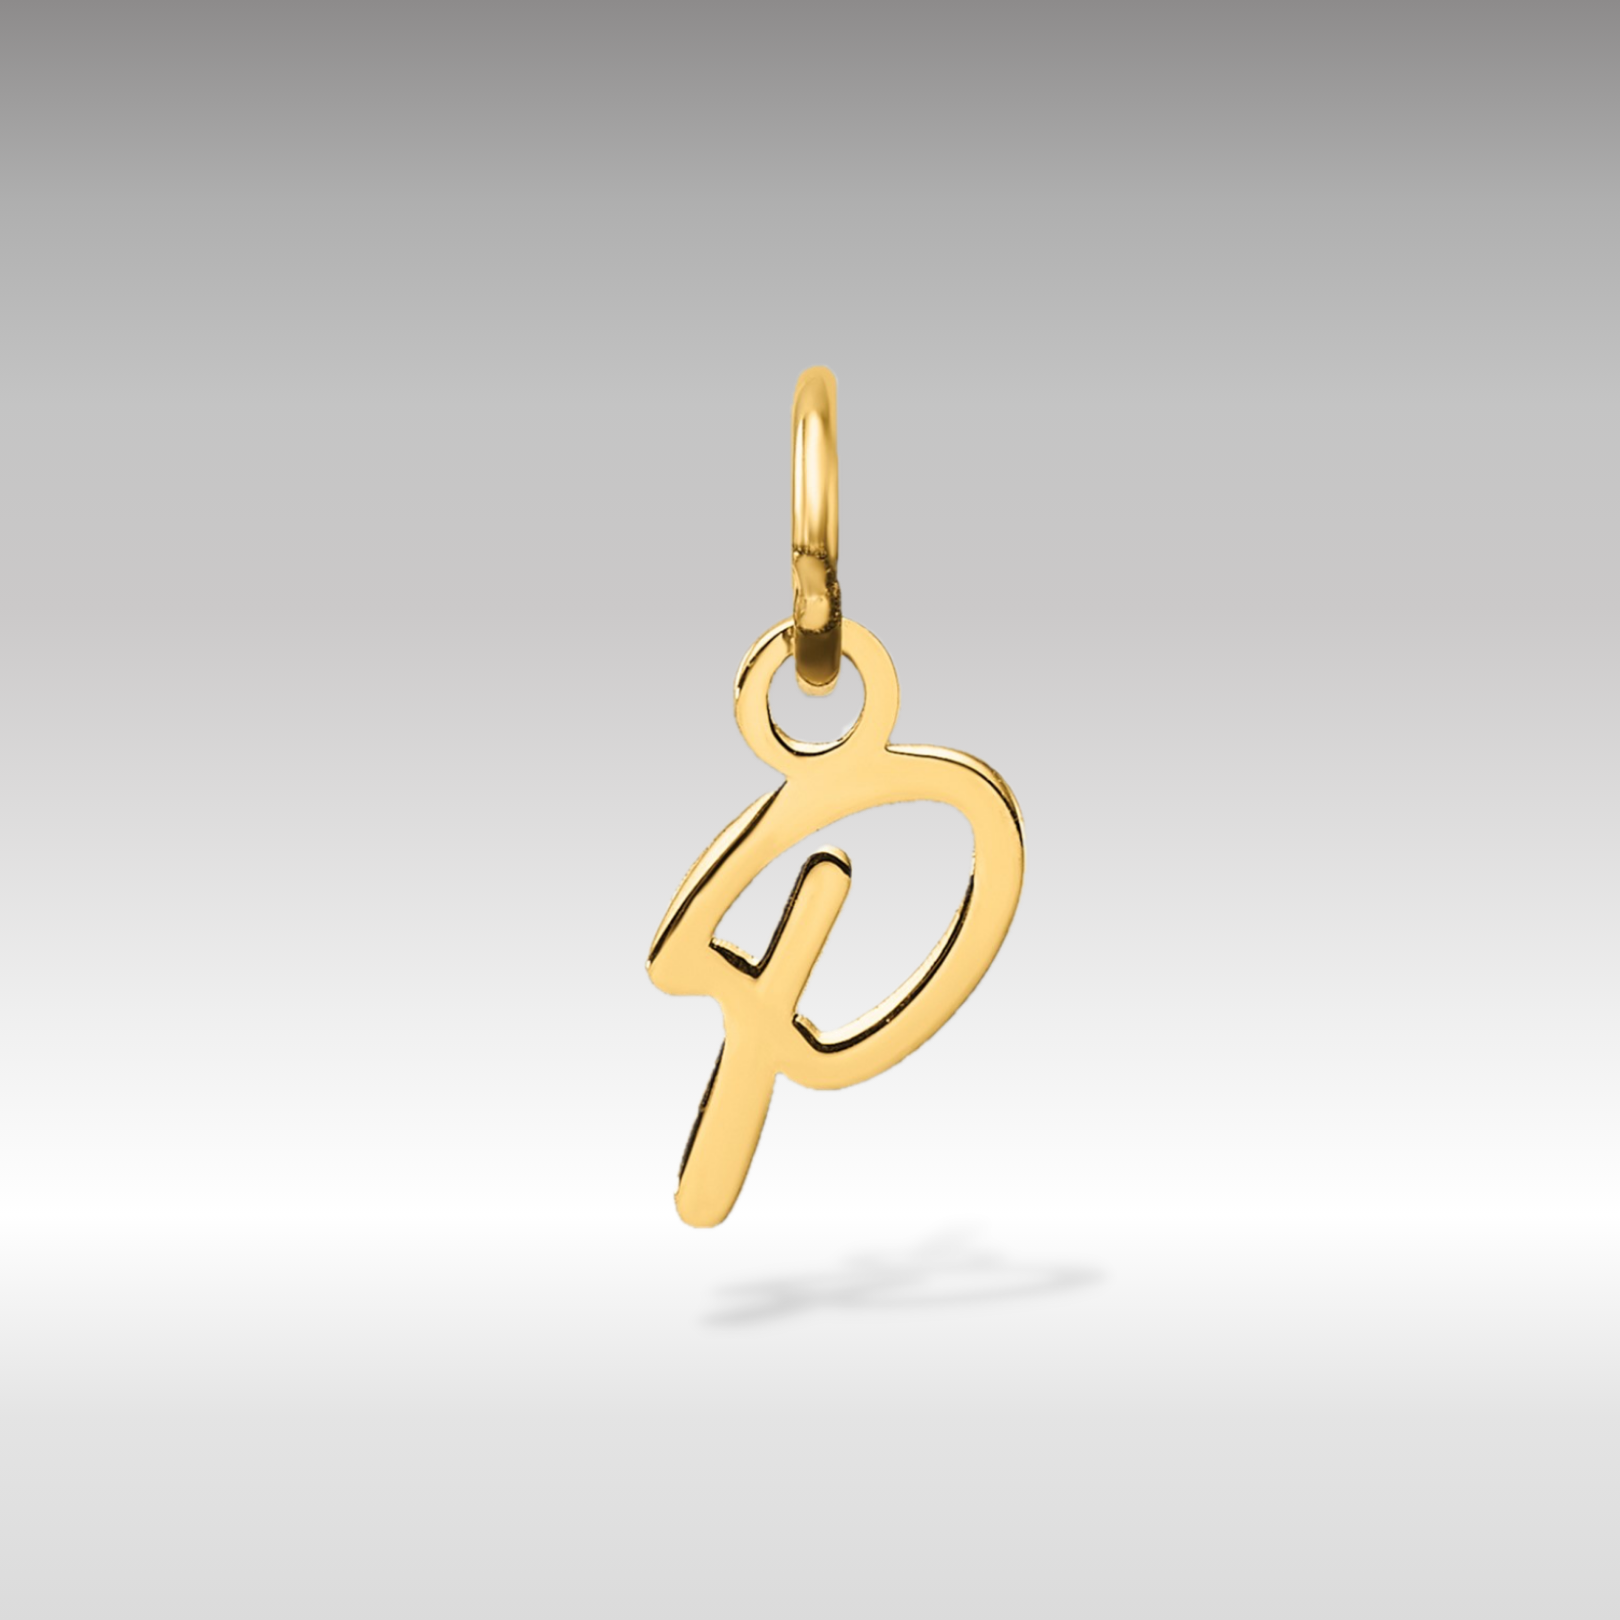 14K Gold Small Script Letter "P" Initial Pendant - Charlie & Co. Jewelry